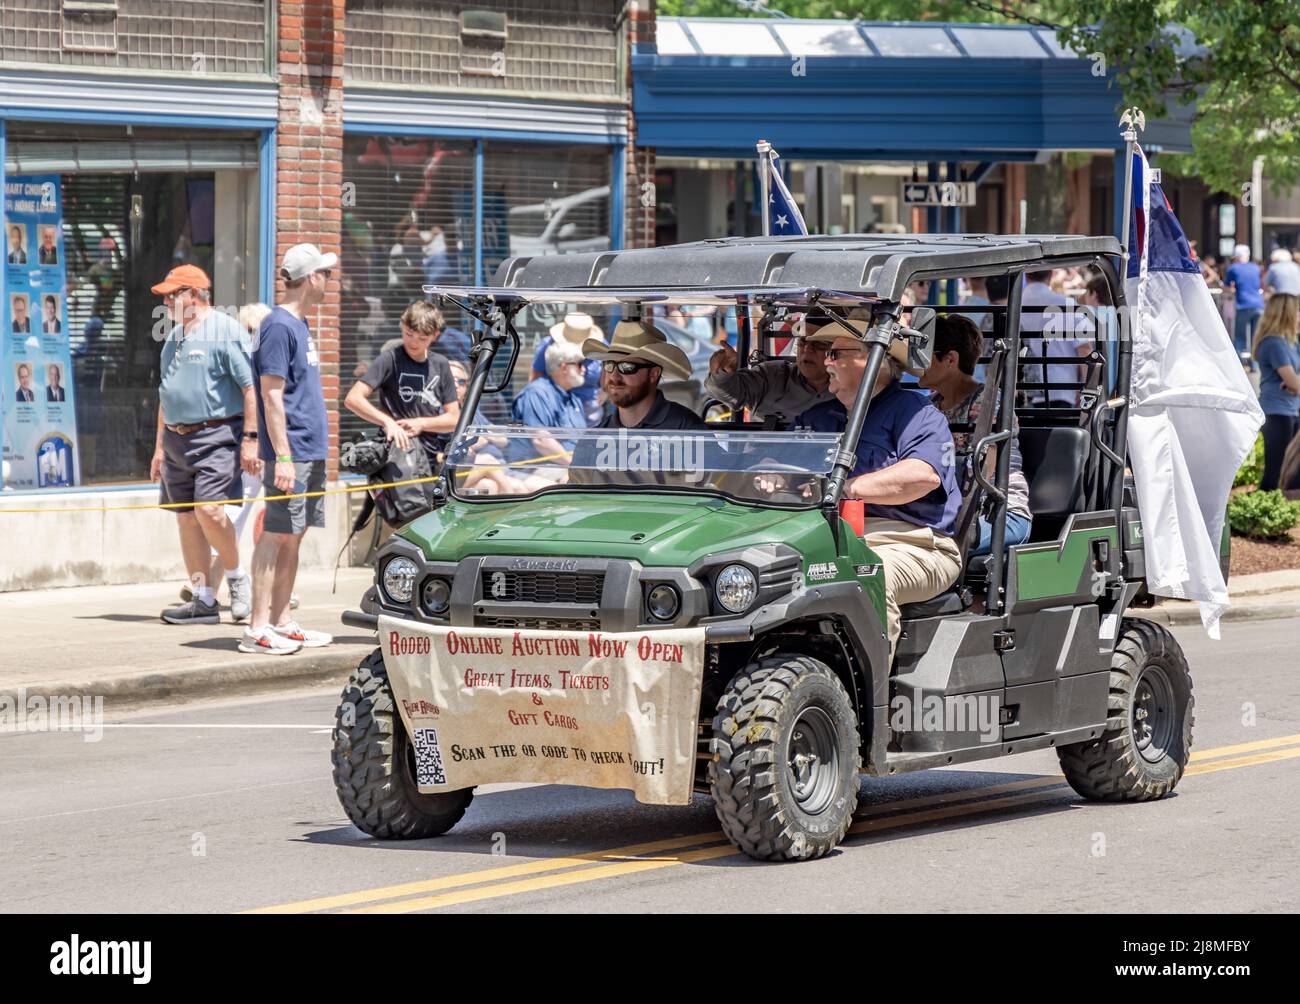 People riding in a four person ATV in the Franklin Rodeo parade Stock Photo